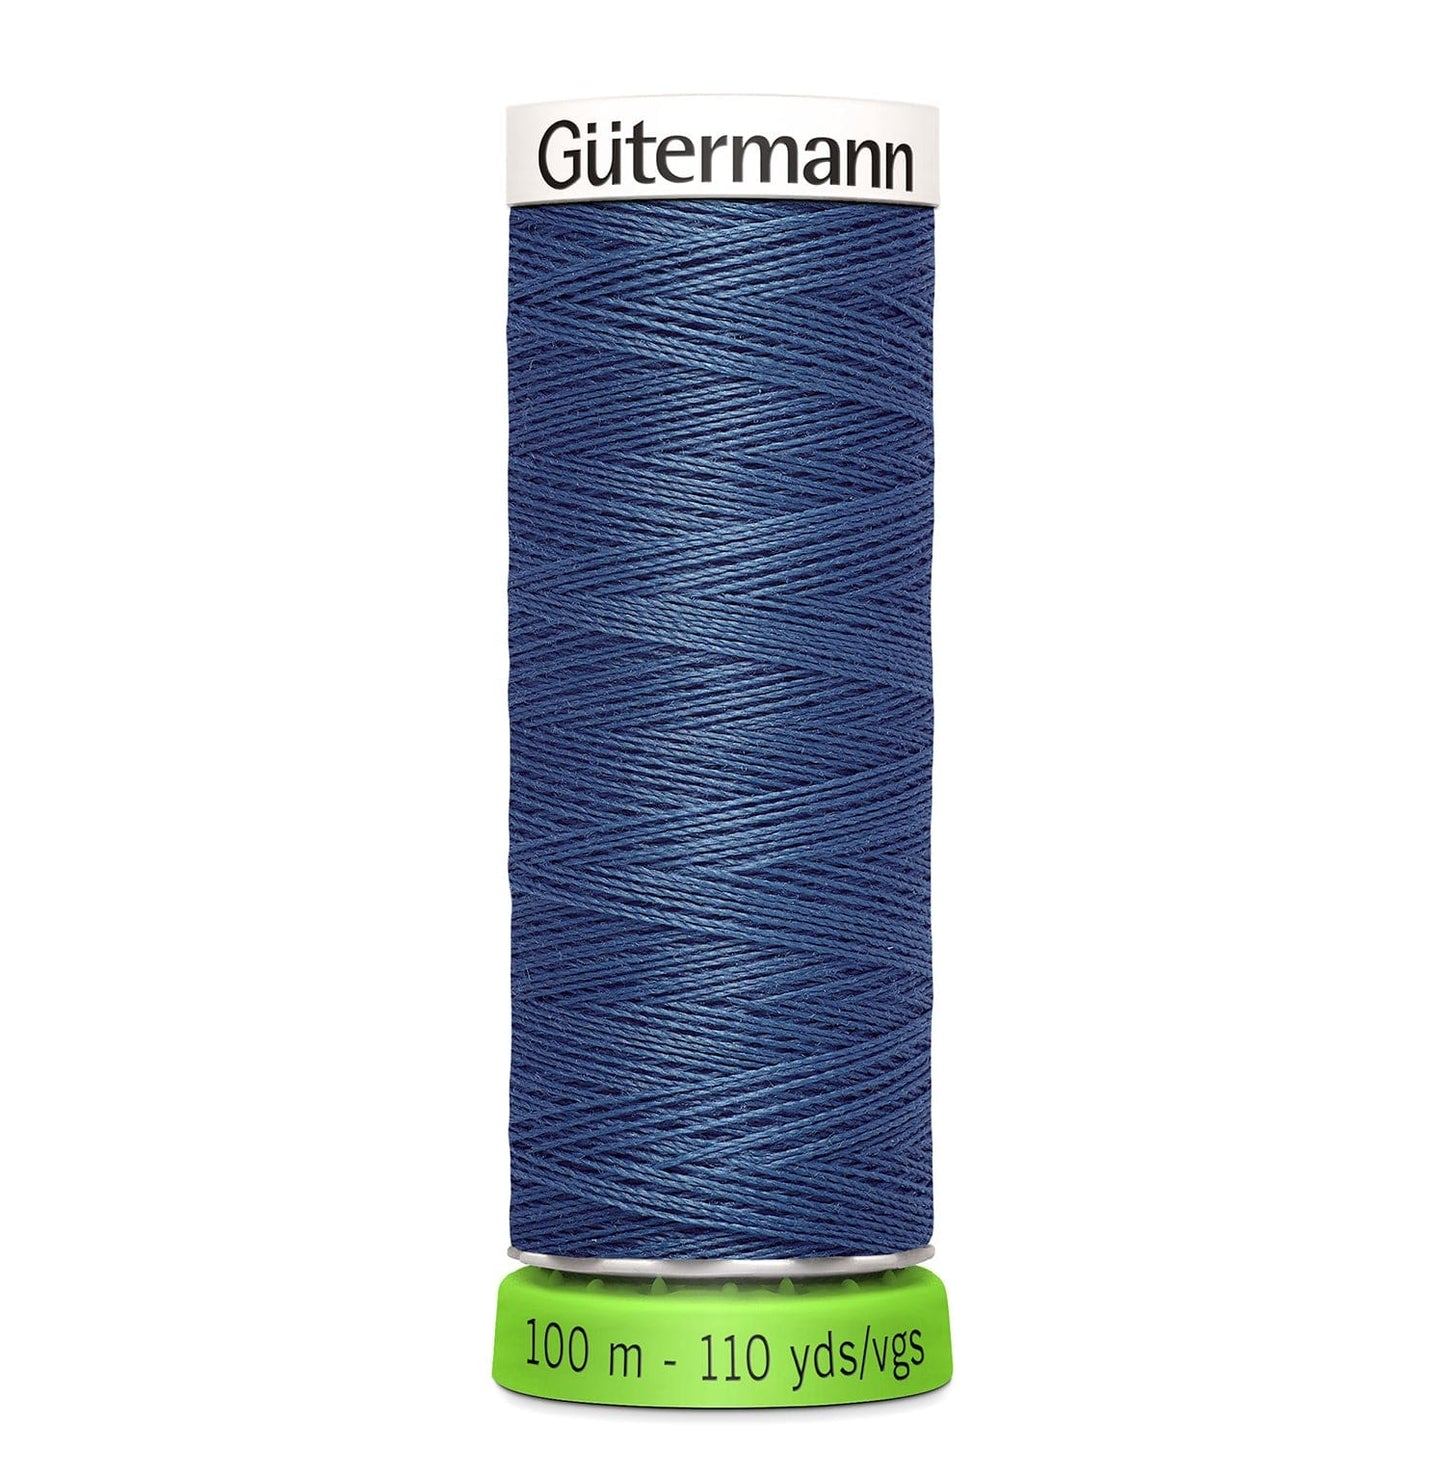 100 m Reel Gütermann Recycled Sew-All Thread in Smoky Blue no. 435